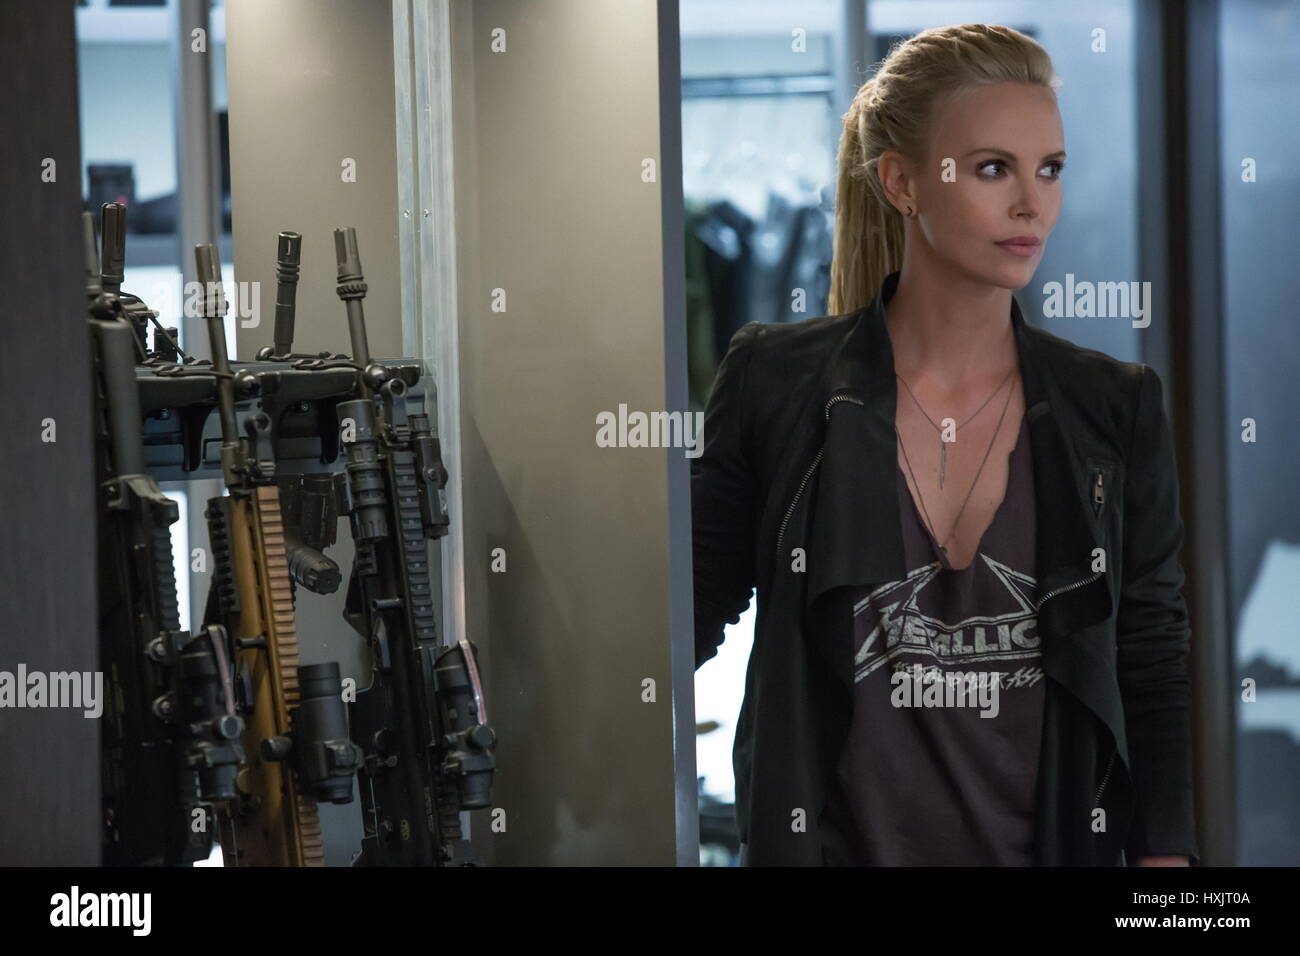 RELEASE DATE: April 14, 2017 TITLE: The Fate of the Furious STUDIO: Universal Pictures DIRECTOR: F. Gary Gray PLOT: When a mysterious woman seduces Dom into the world of crime and a betrayal of those closest to him, the crew face trials that will test them as never before PICTURED: Charlize Theron as Cipher. (Credit Image: © Universal Pictures/Entertainment Pictures) Stock Photo